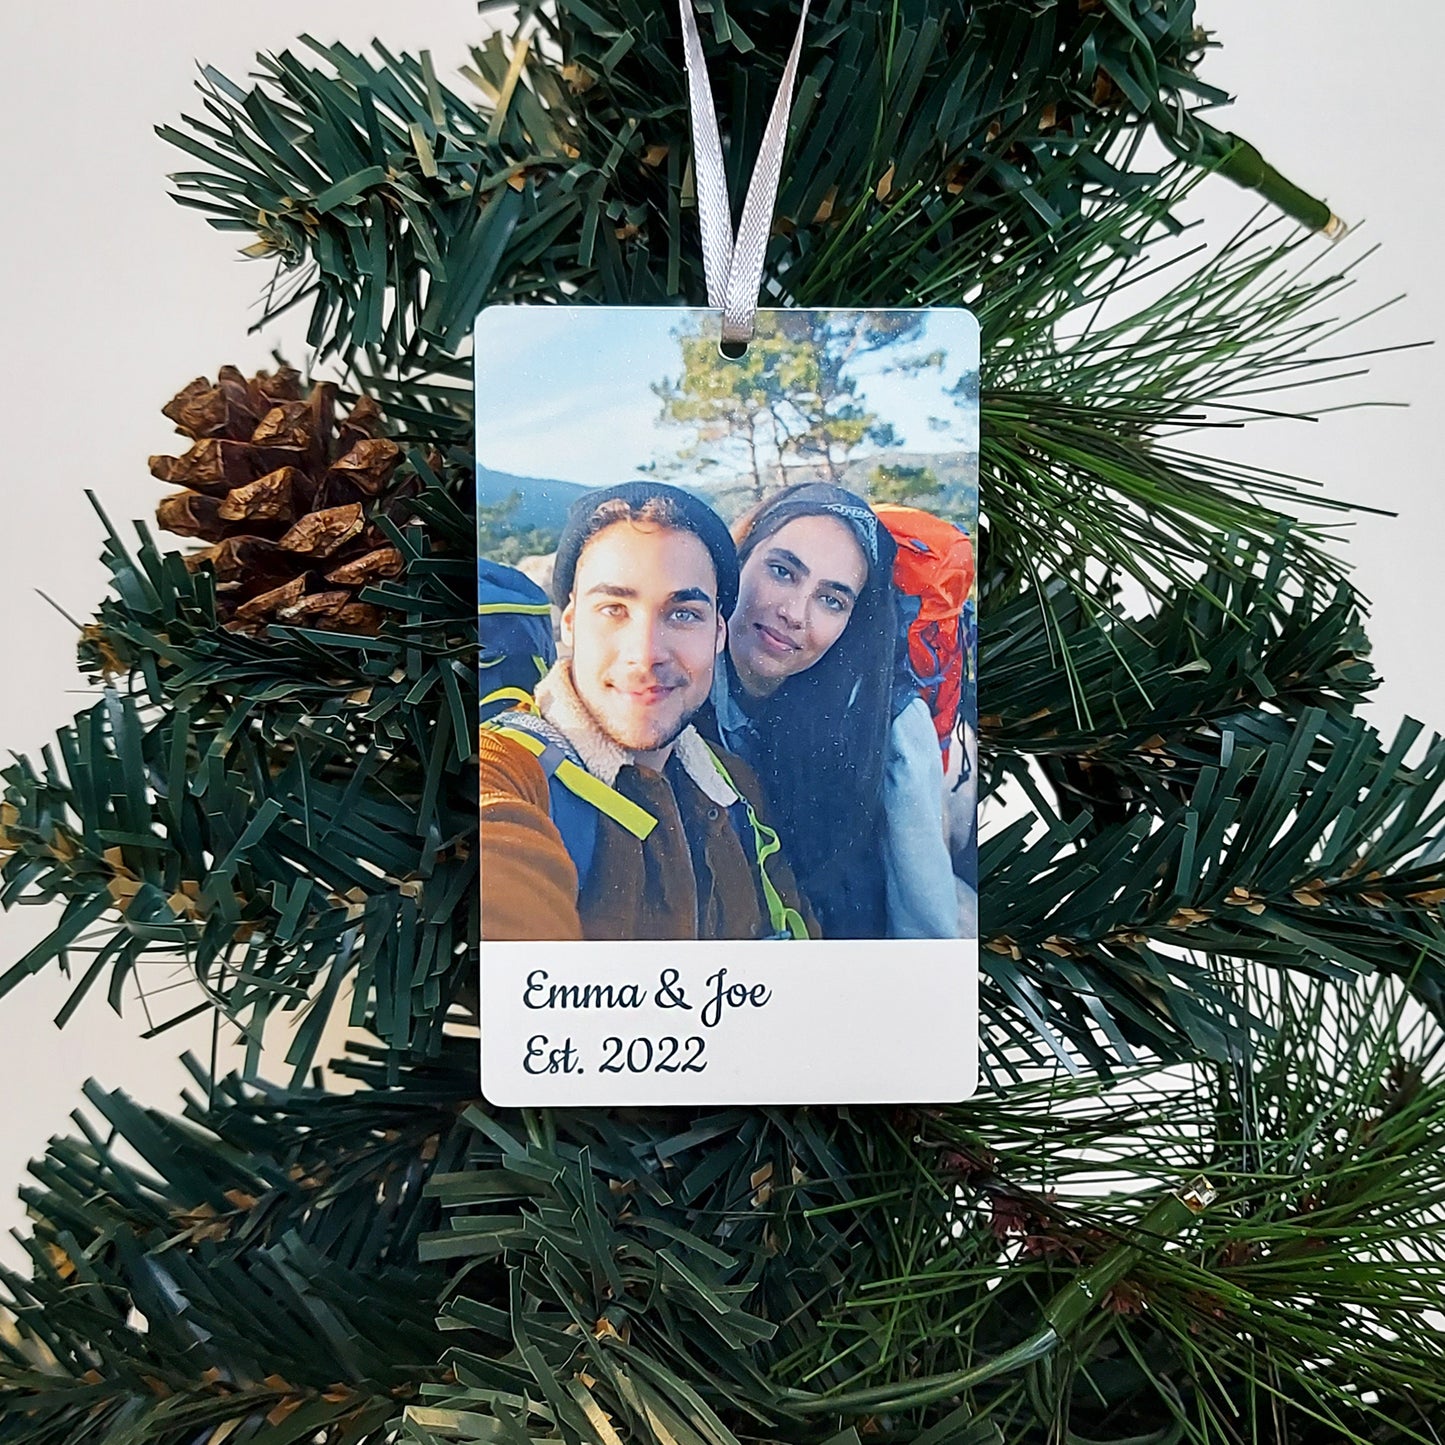 Personalised Metal Photo Ornament, Christmas Hanging Photo Bauble